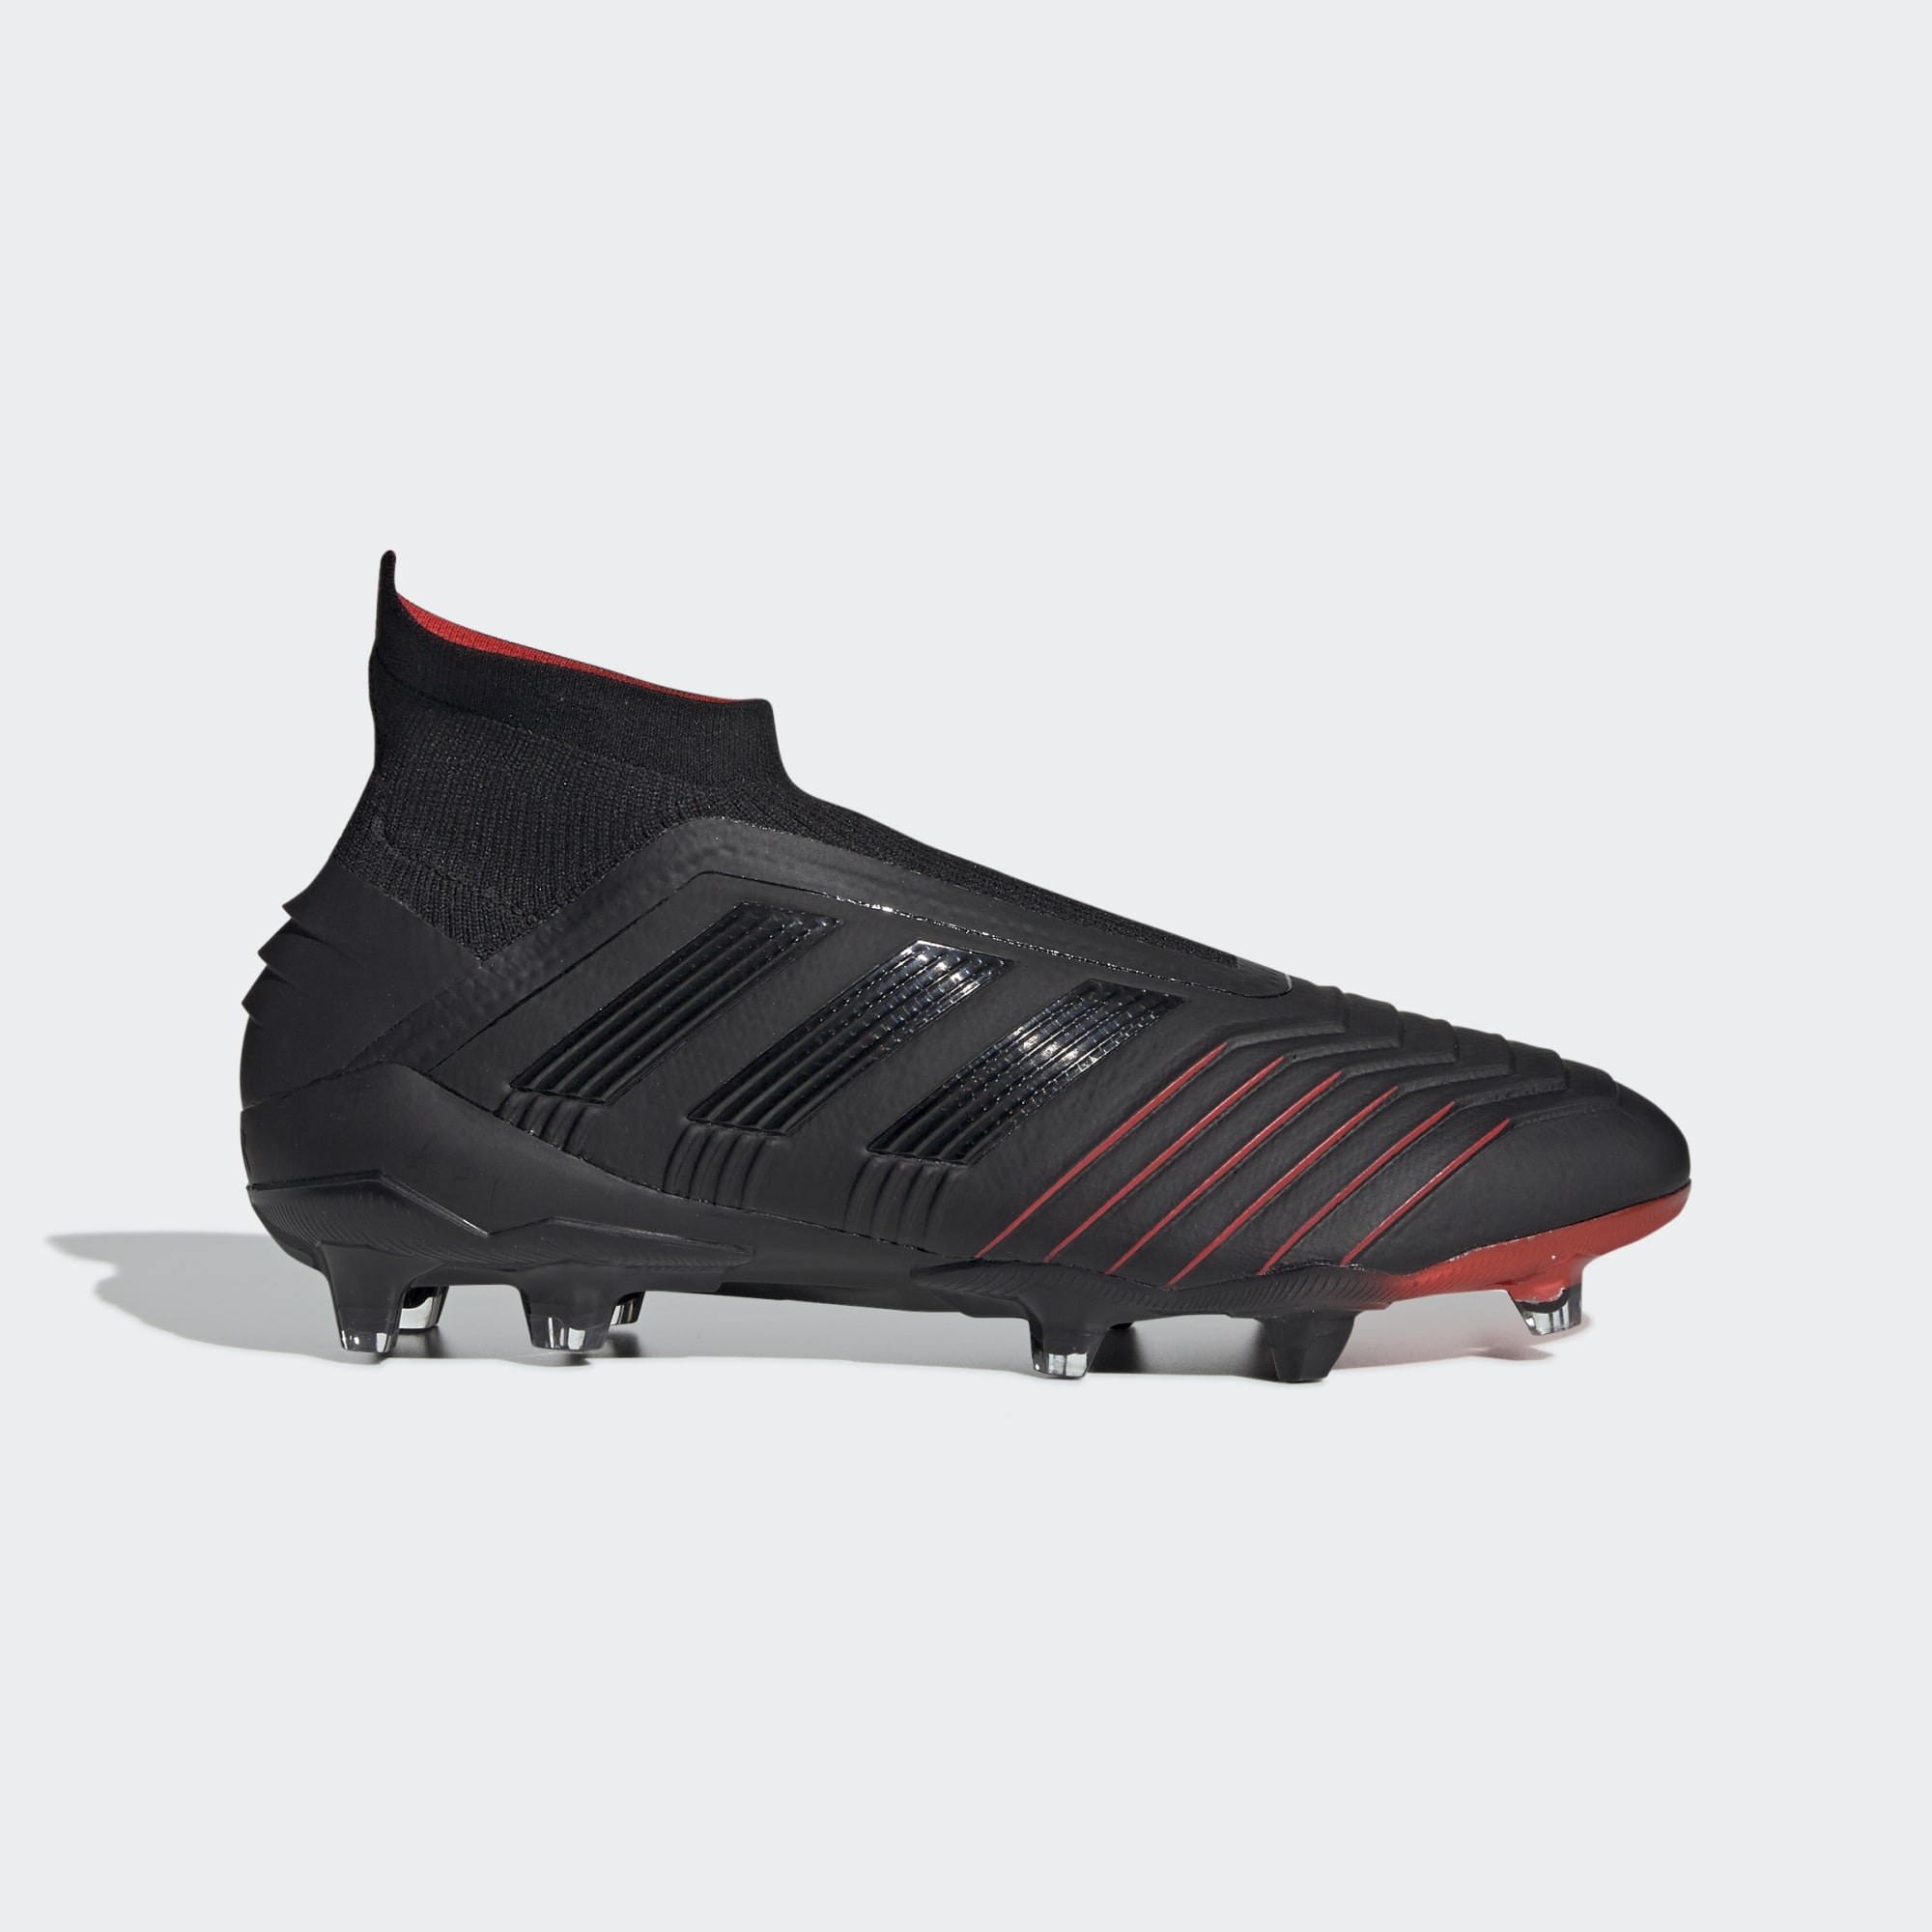 Adidas 19+ FG Archetic - Core Black / Core Black / Active Red - Football Shirt Culture - Latest Football Kit News and More